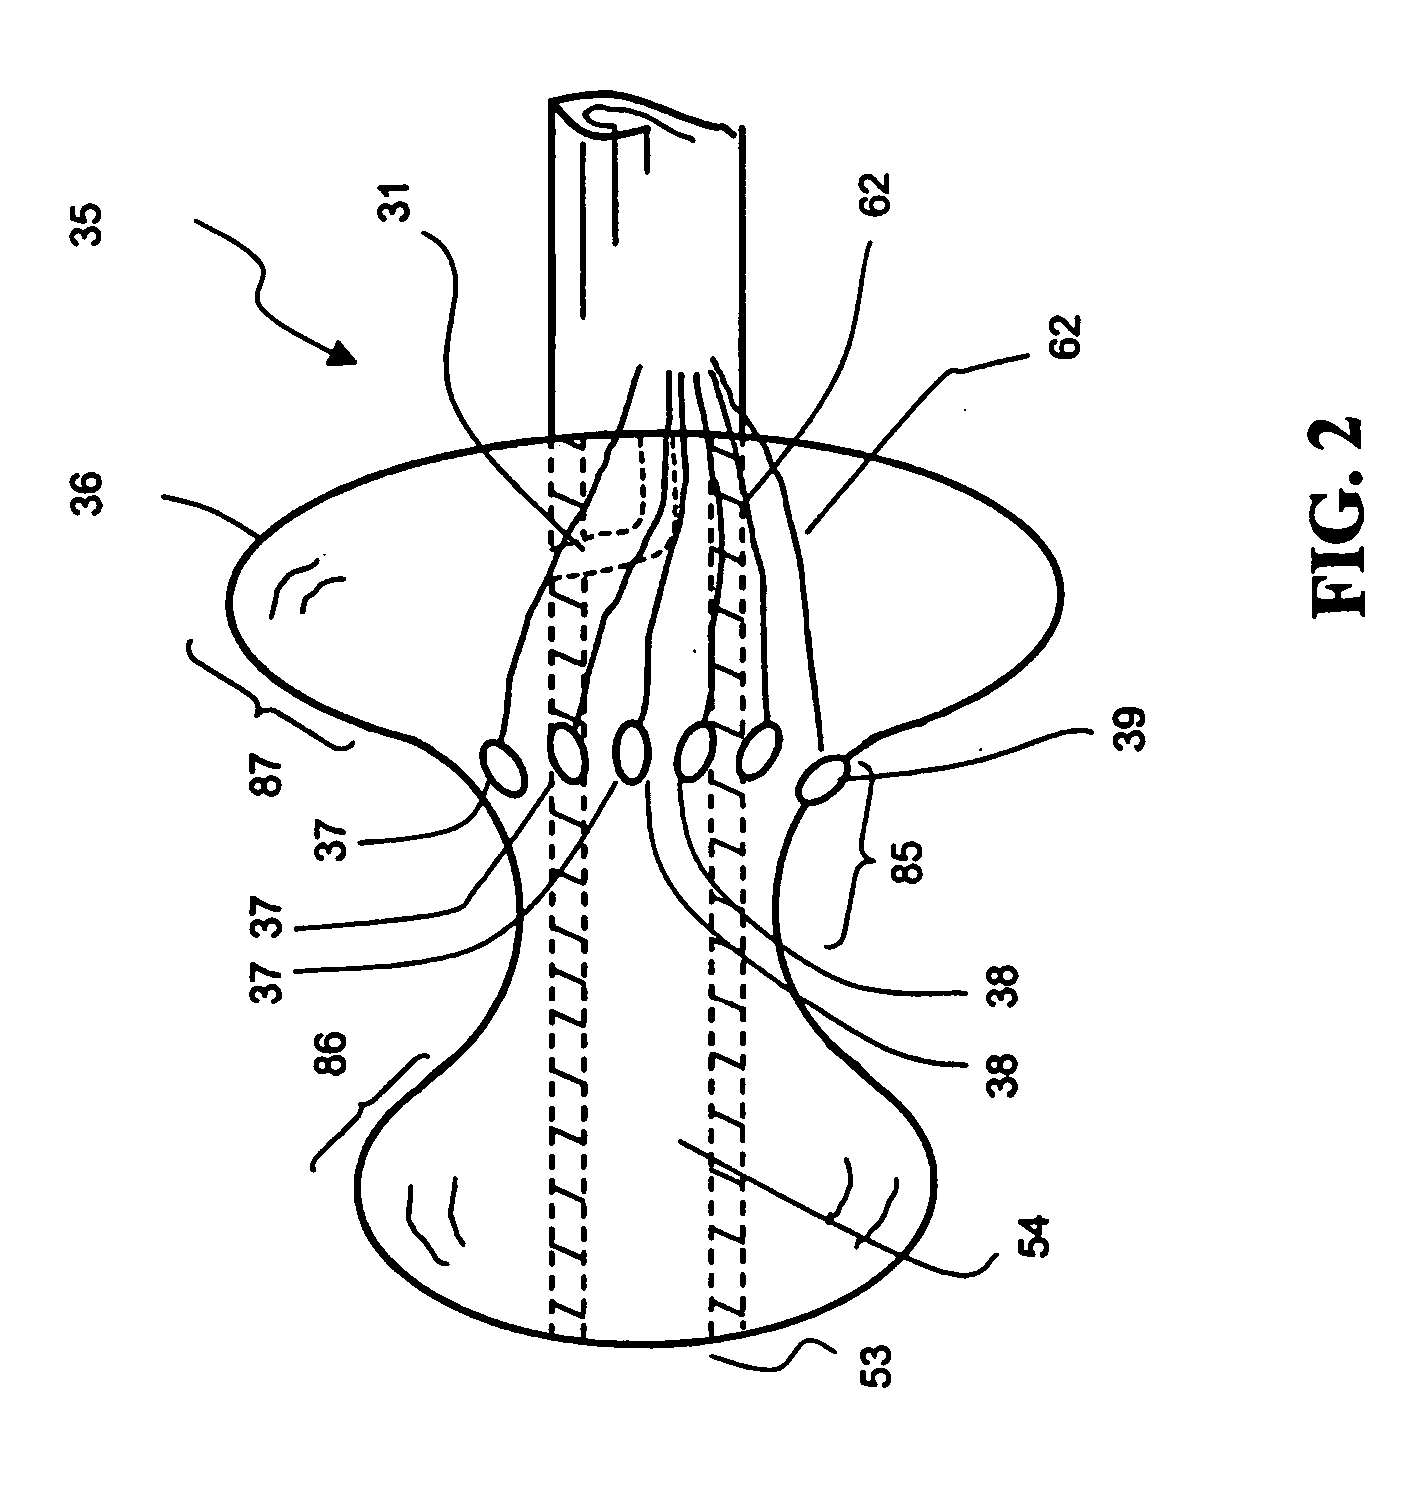 Methods for treating mitral valve annulus with biodegradable compression element